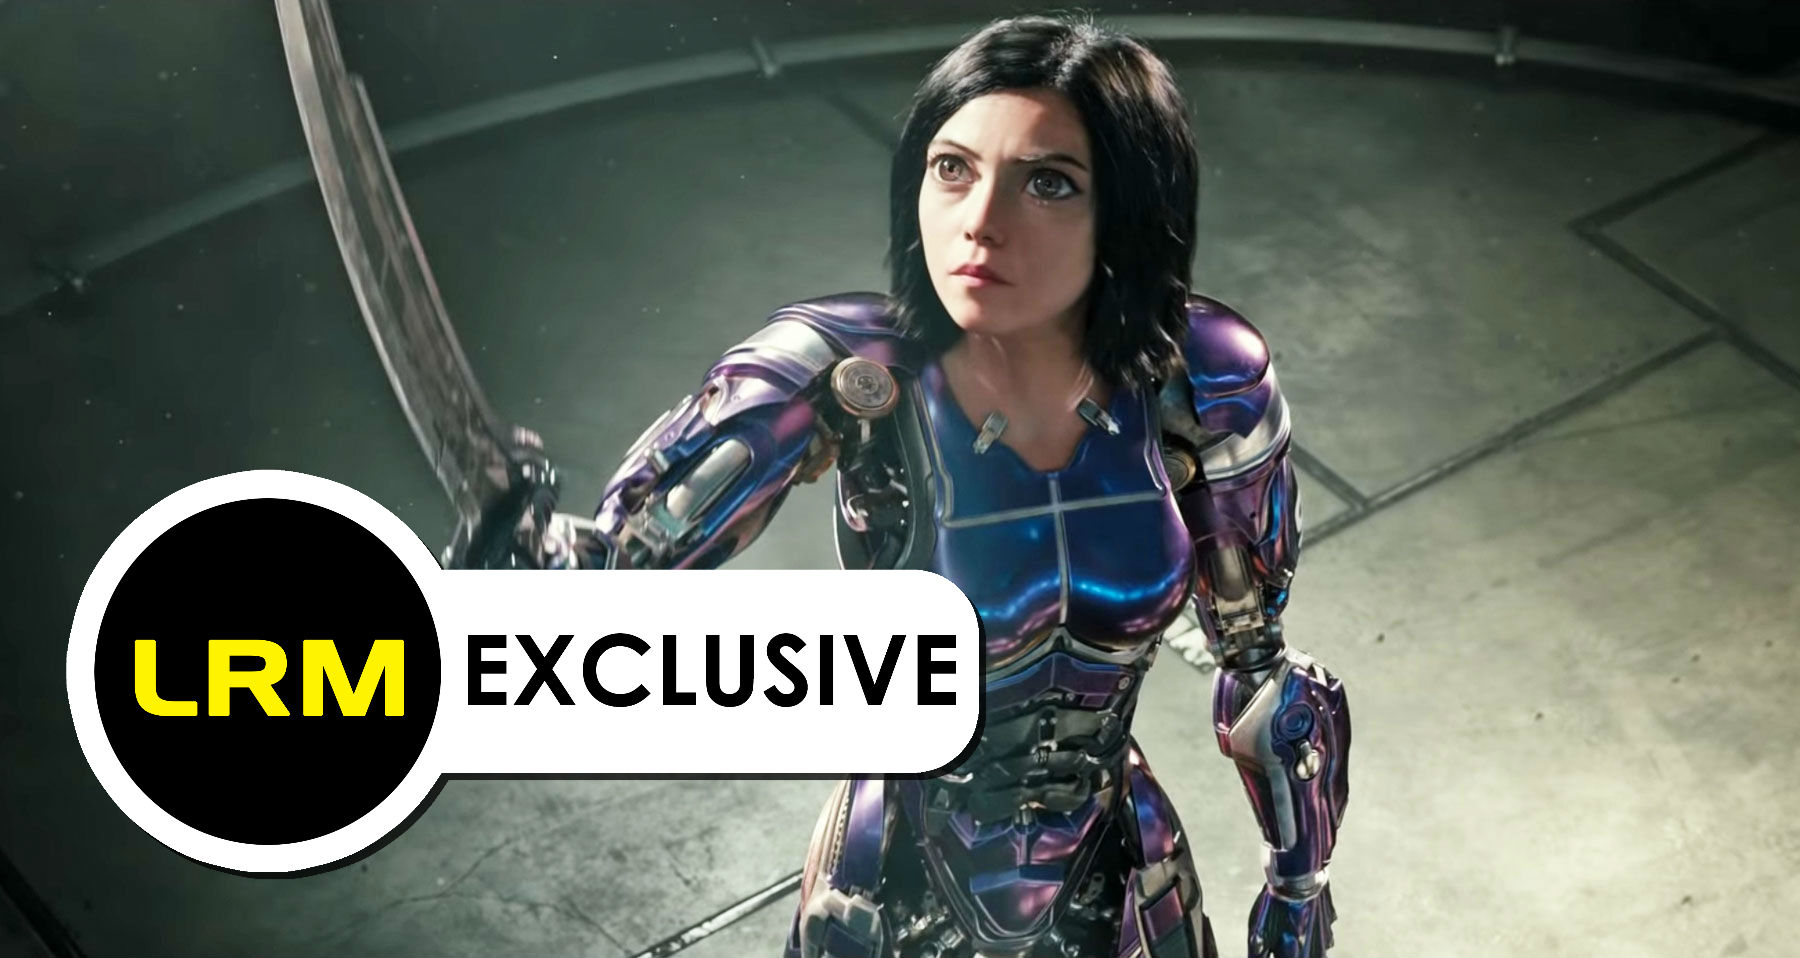 LRM EXCLUSIVE: Alita – How James Cameron Pushed Robert Rodriguez To Change His Style